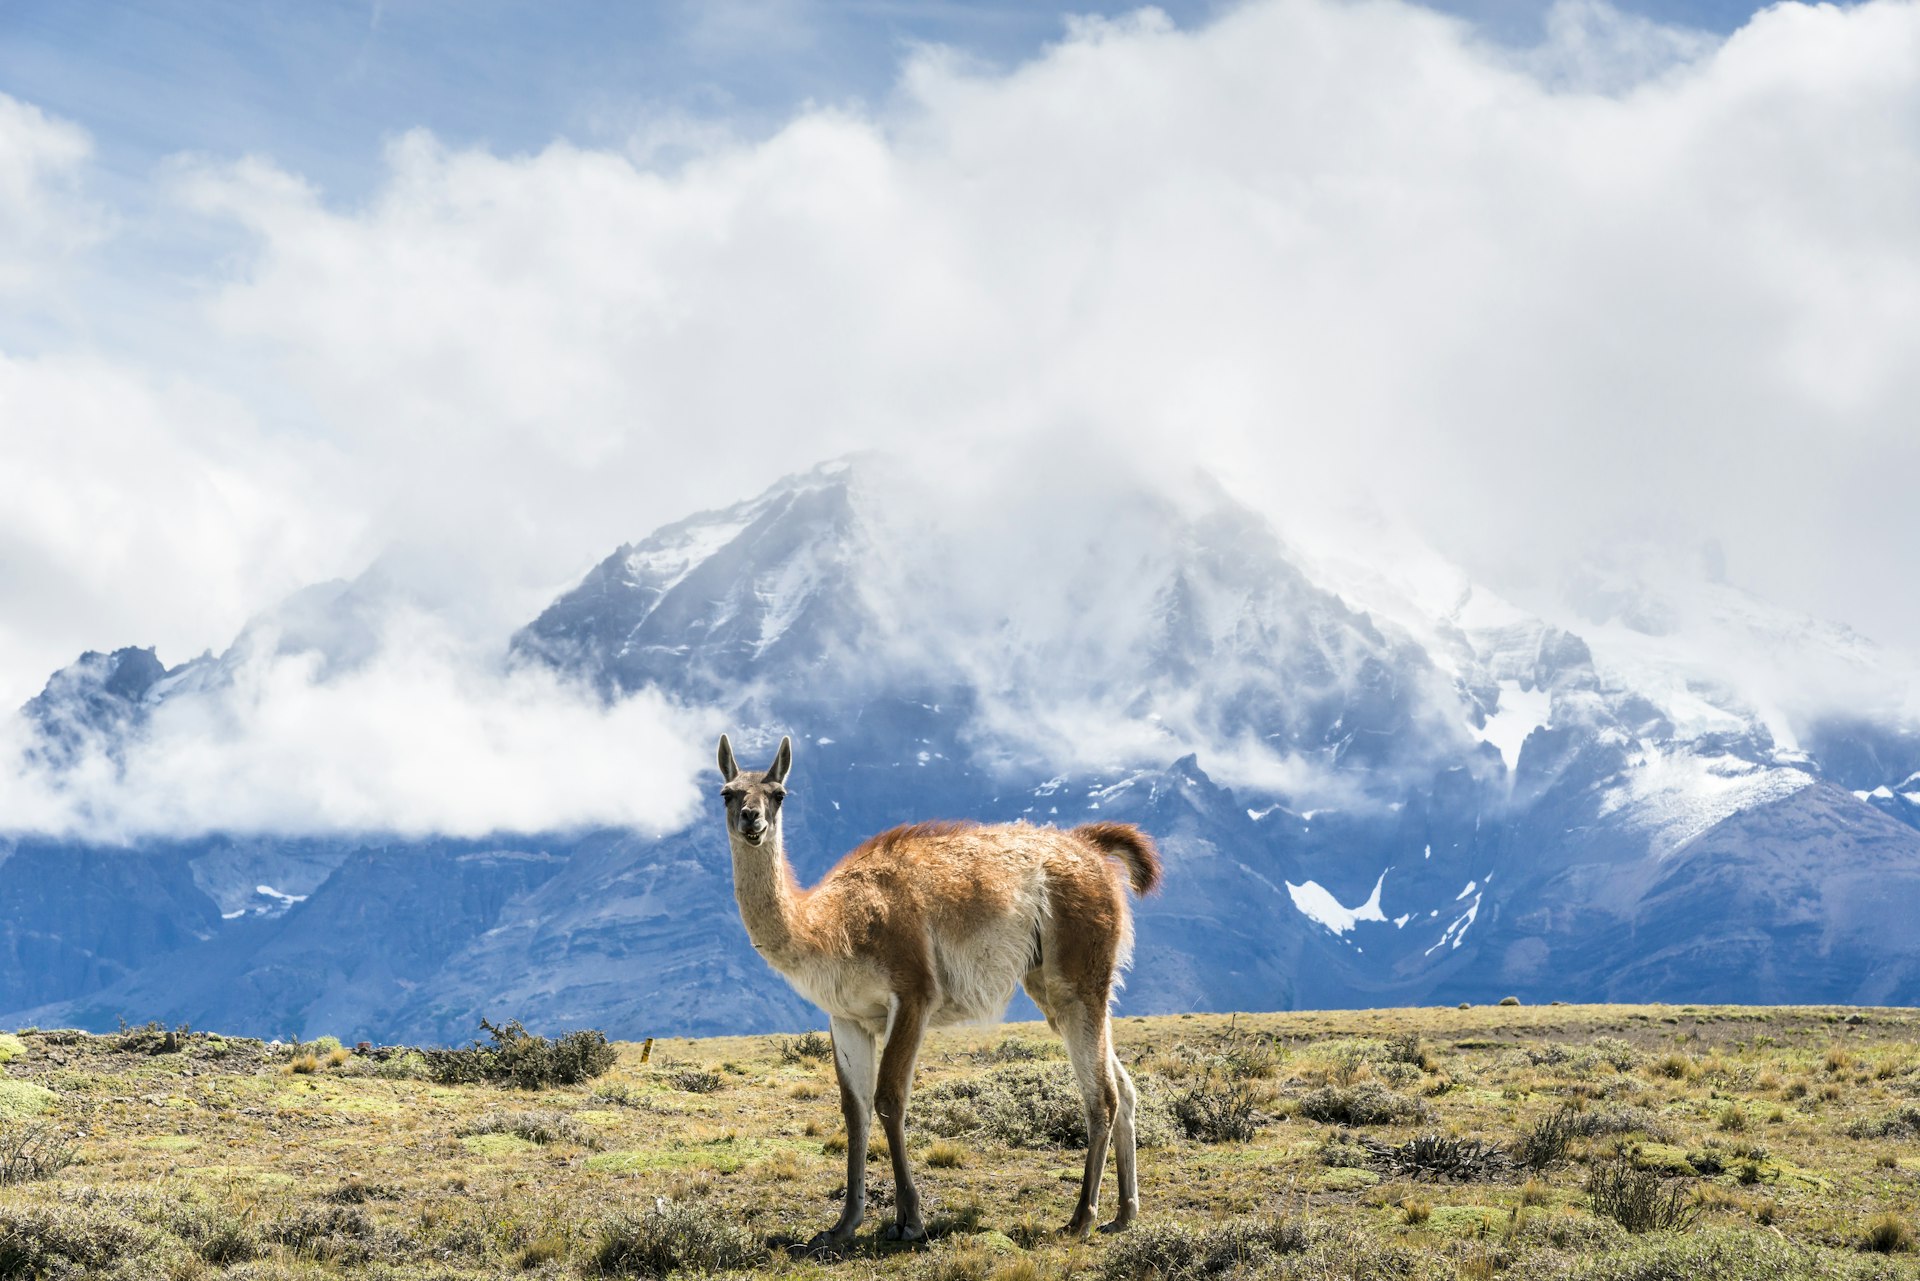 A guanaco in Torres del Paine National Park.